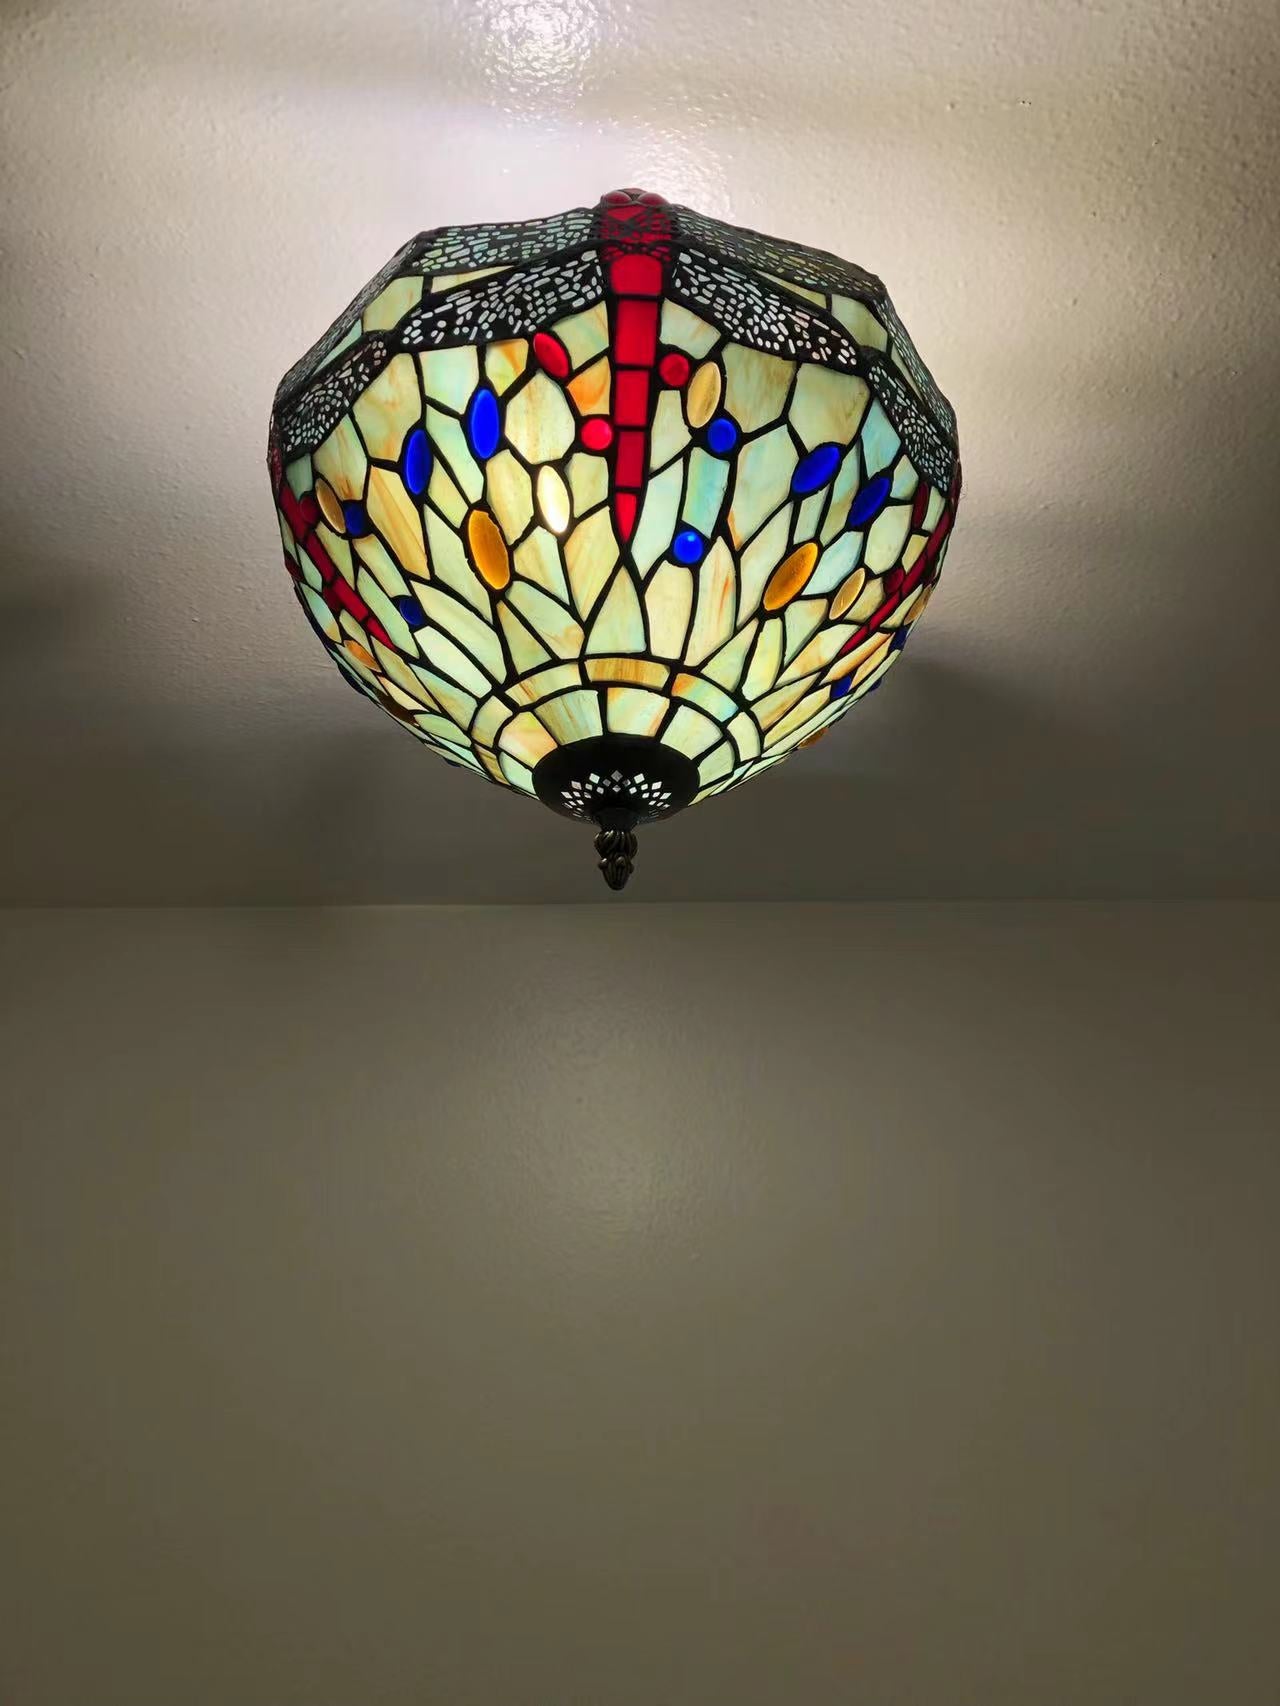 Tiffany Style Ceiling Lamp Dragonfly